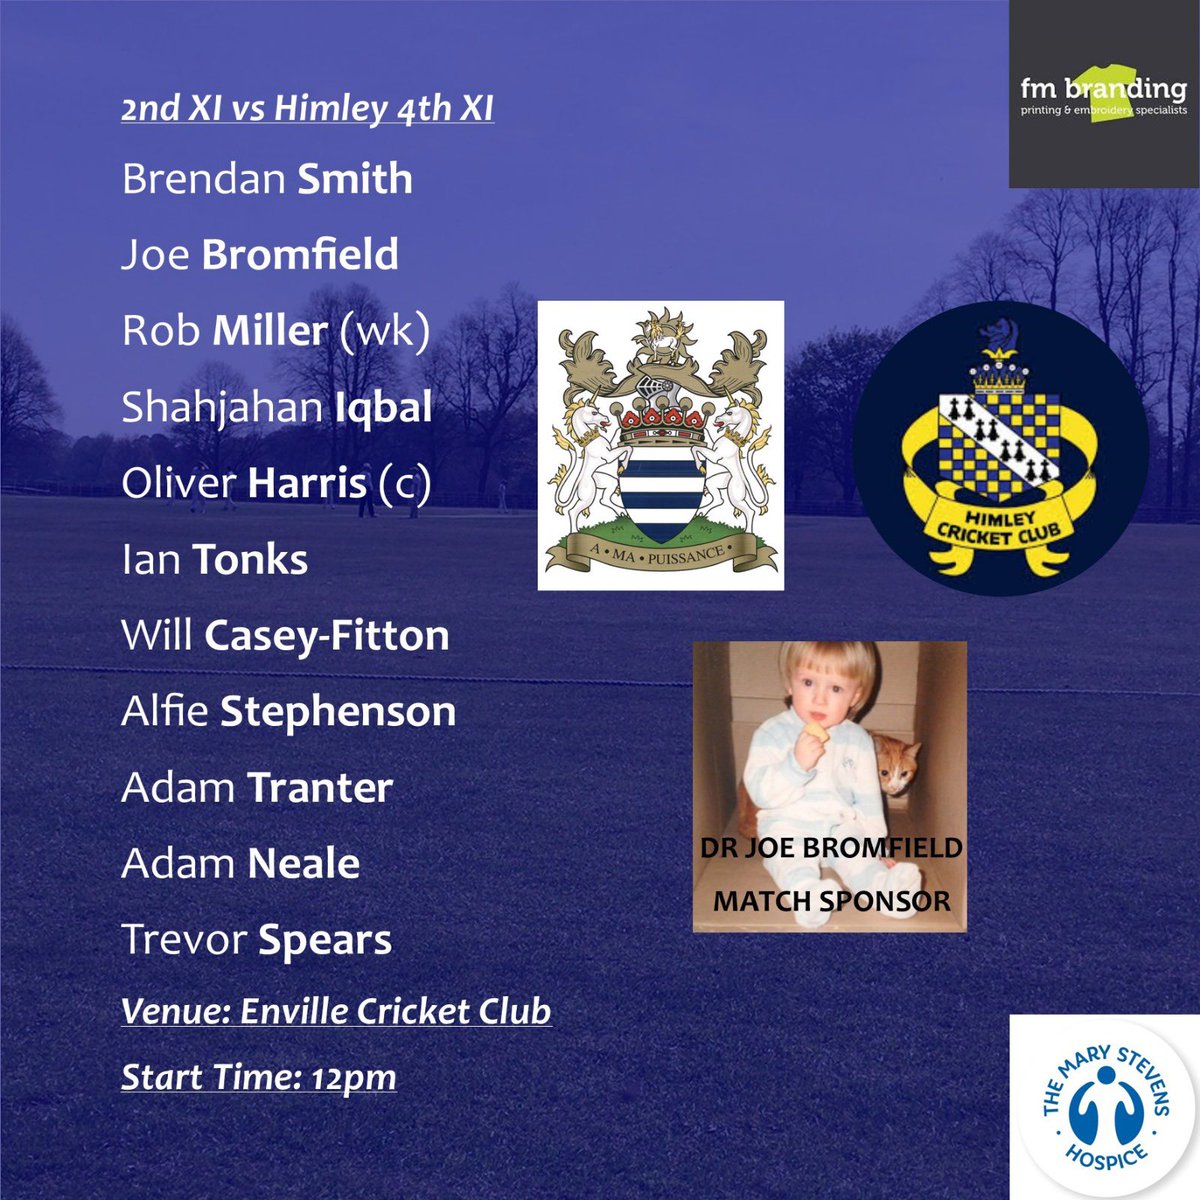 Team news is in for our only fixture of the opening weekend as unfortunately our 1st XI and 3rd XI have been called off already. Our 2nd XI face Himley 4th XI. Massive thanks to Dr Joe Bromfield for being the first match ball sponsor of the year! @MSHospice @FM_Branding